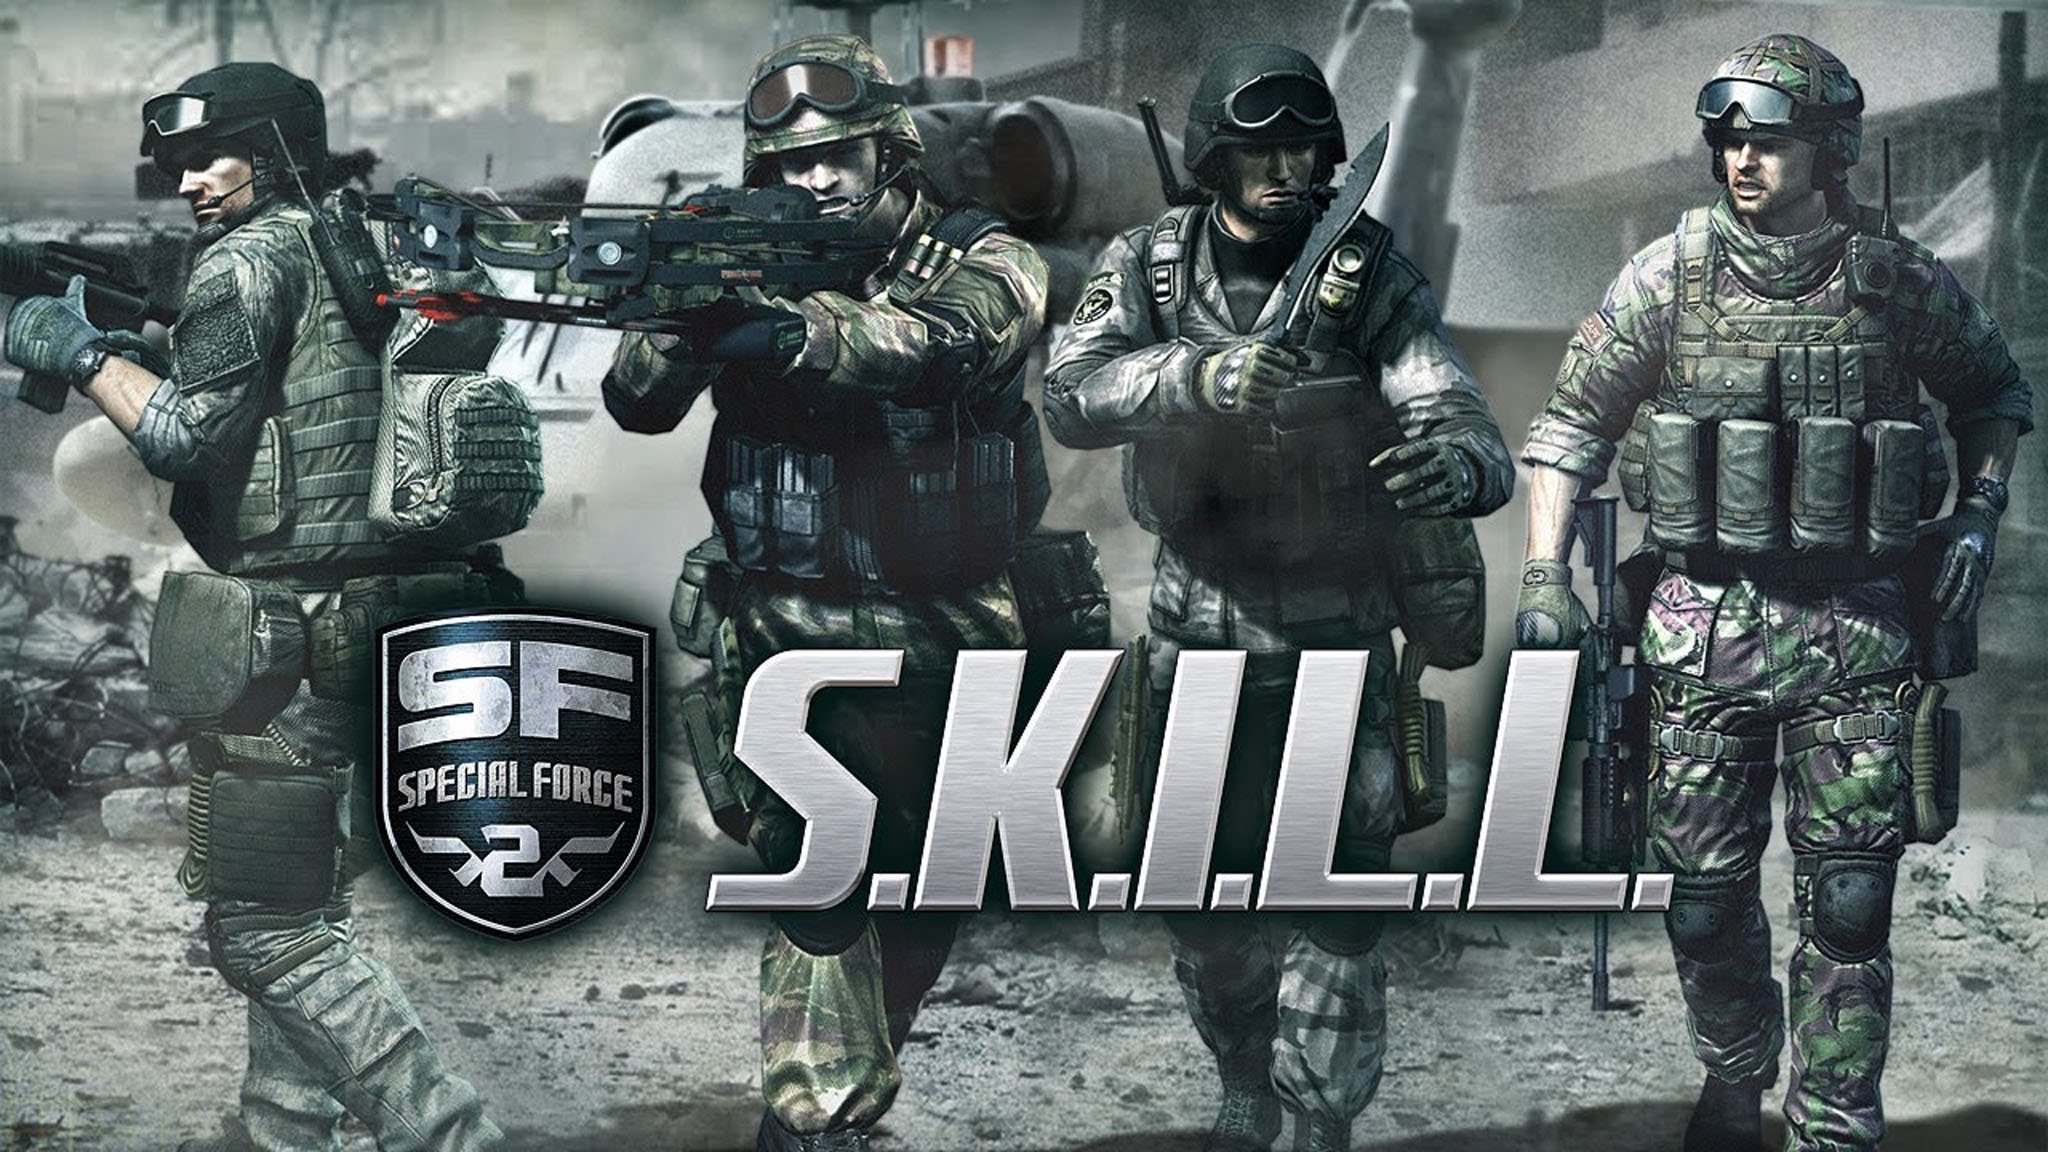 skill, Special, Force, Military, Fps, Shooter, Action, Fighting, War, Soldier, 1sforce, Strategy, Tactical, Warrior, Poster Wallpaper